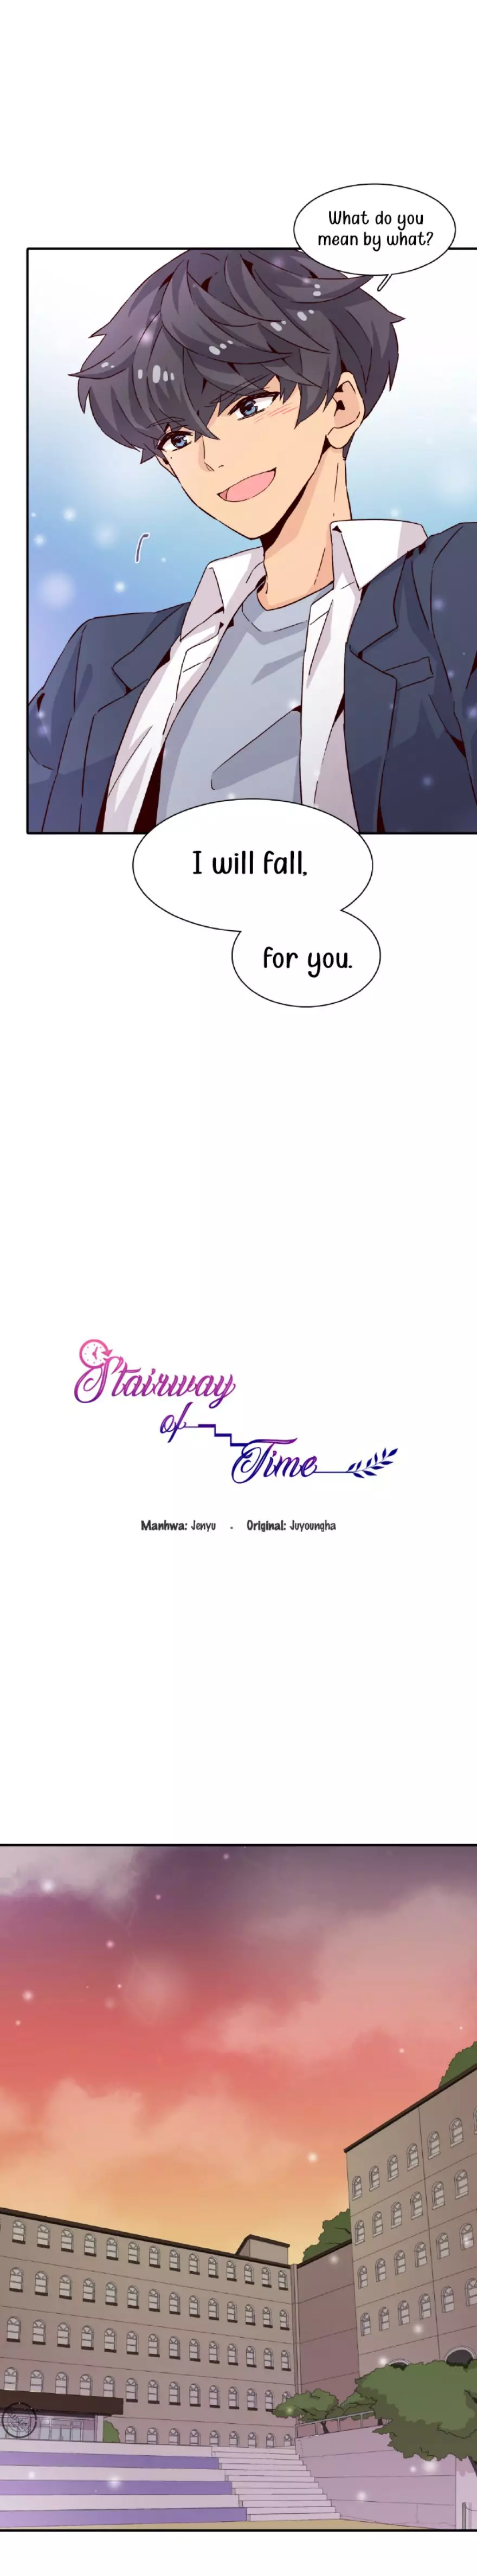 Stairway Of Time - 8 page 3